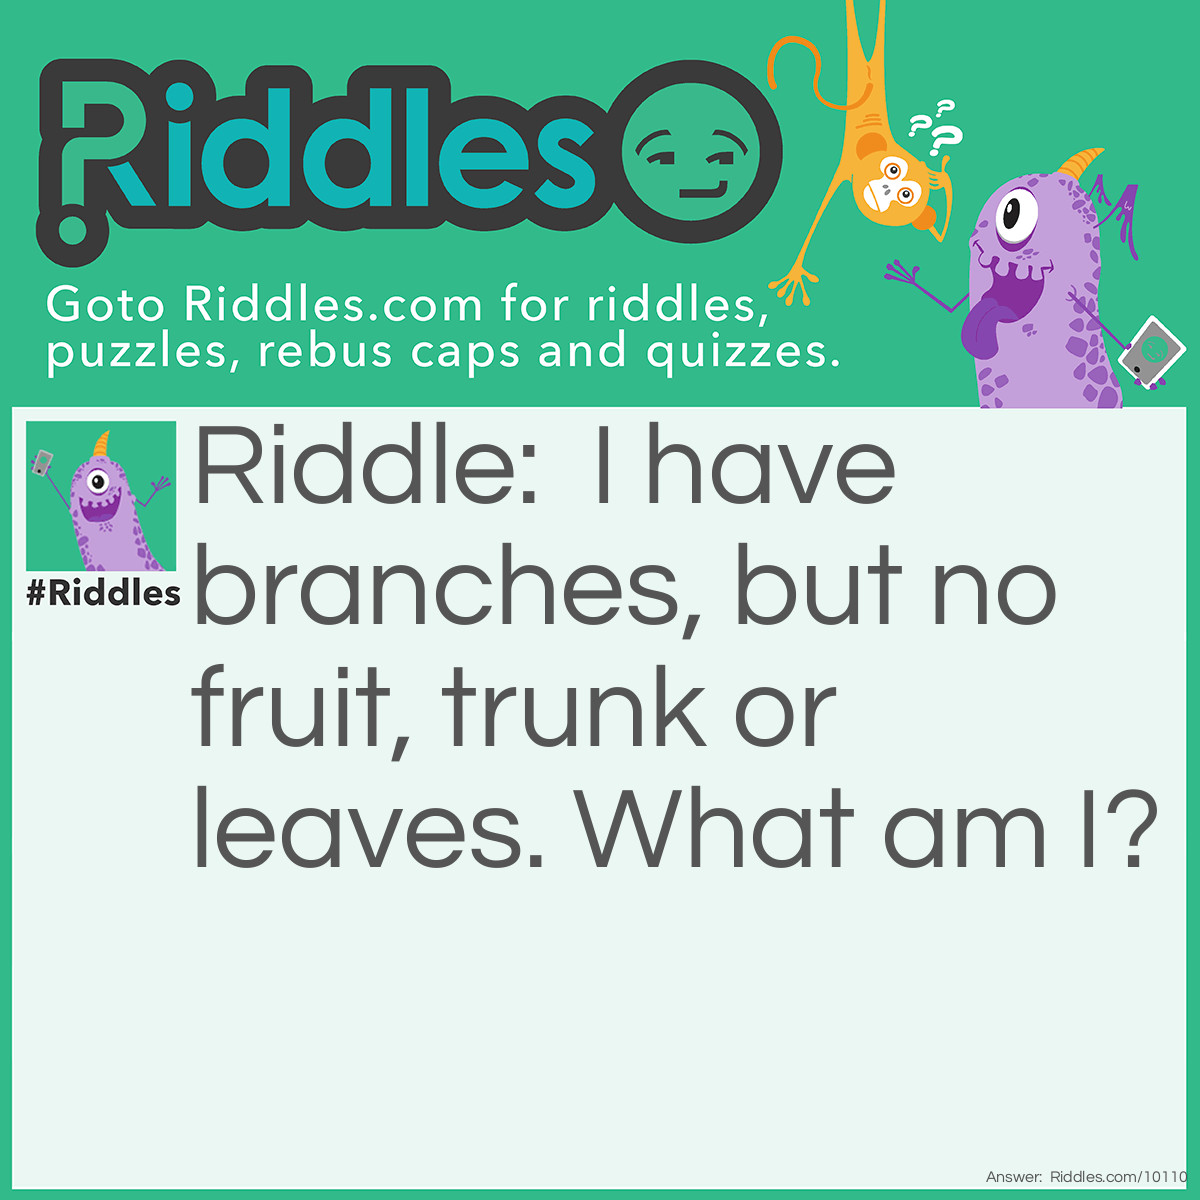 Riddle: I have branches, but no fruit, trunk or leaves. What am I? Answer: A bank.